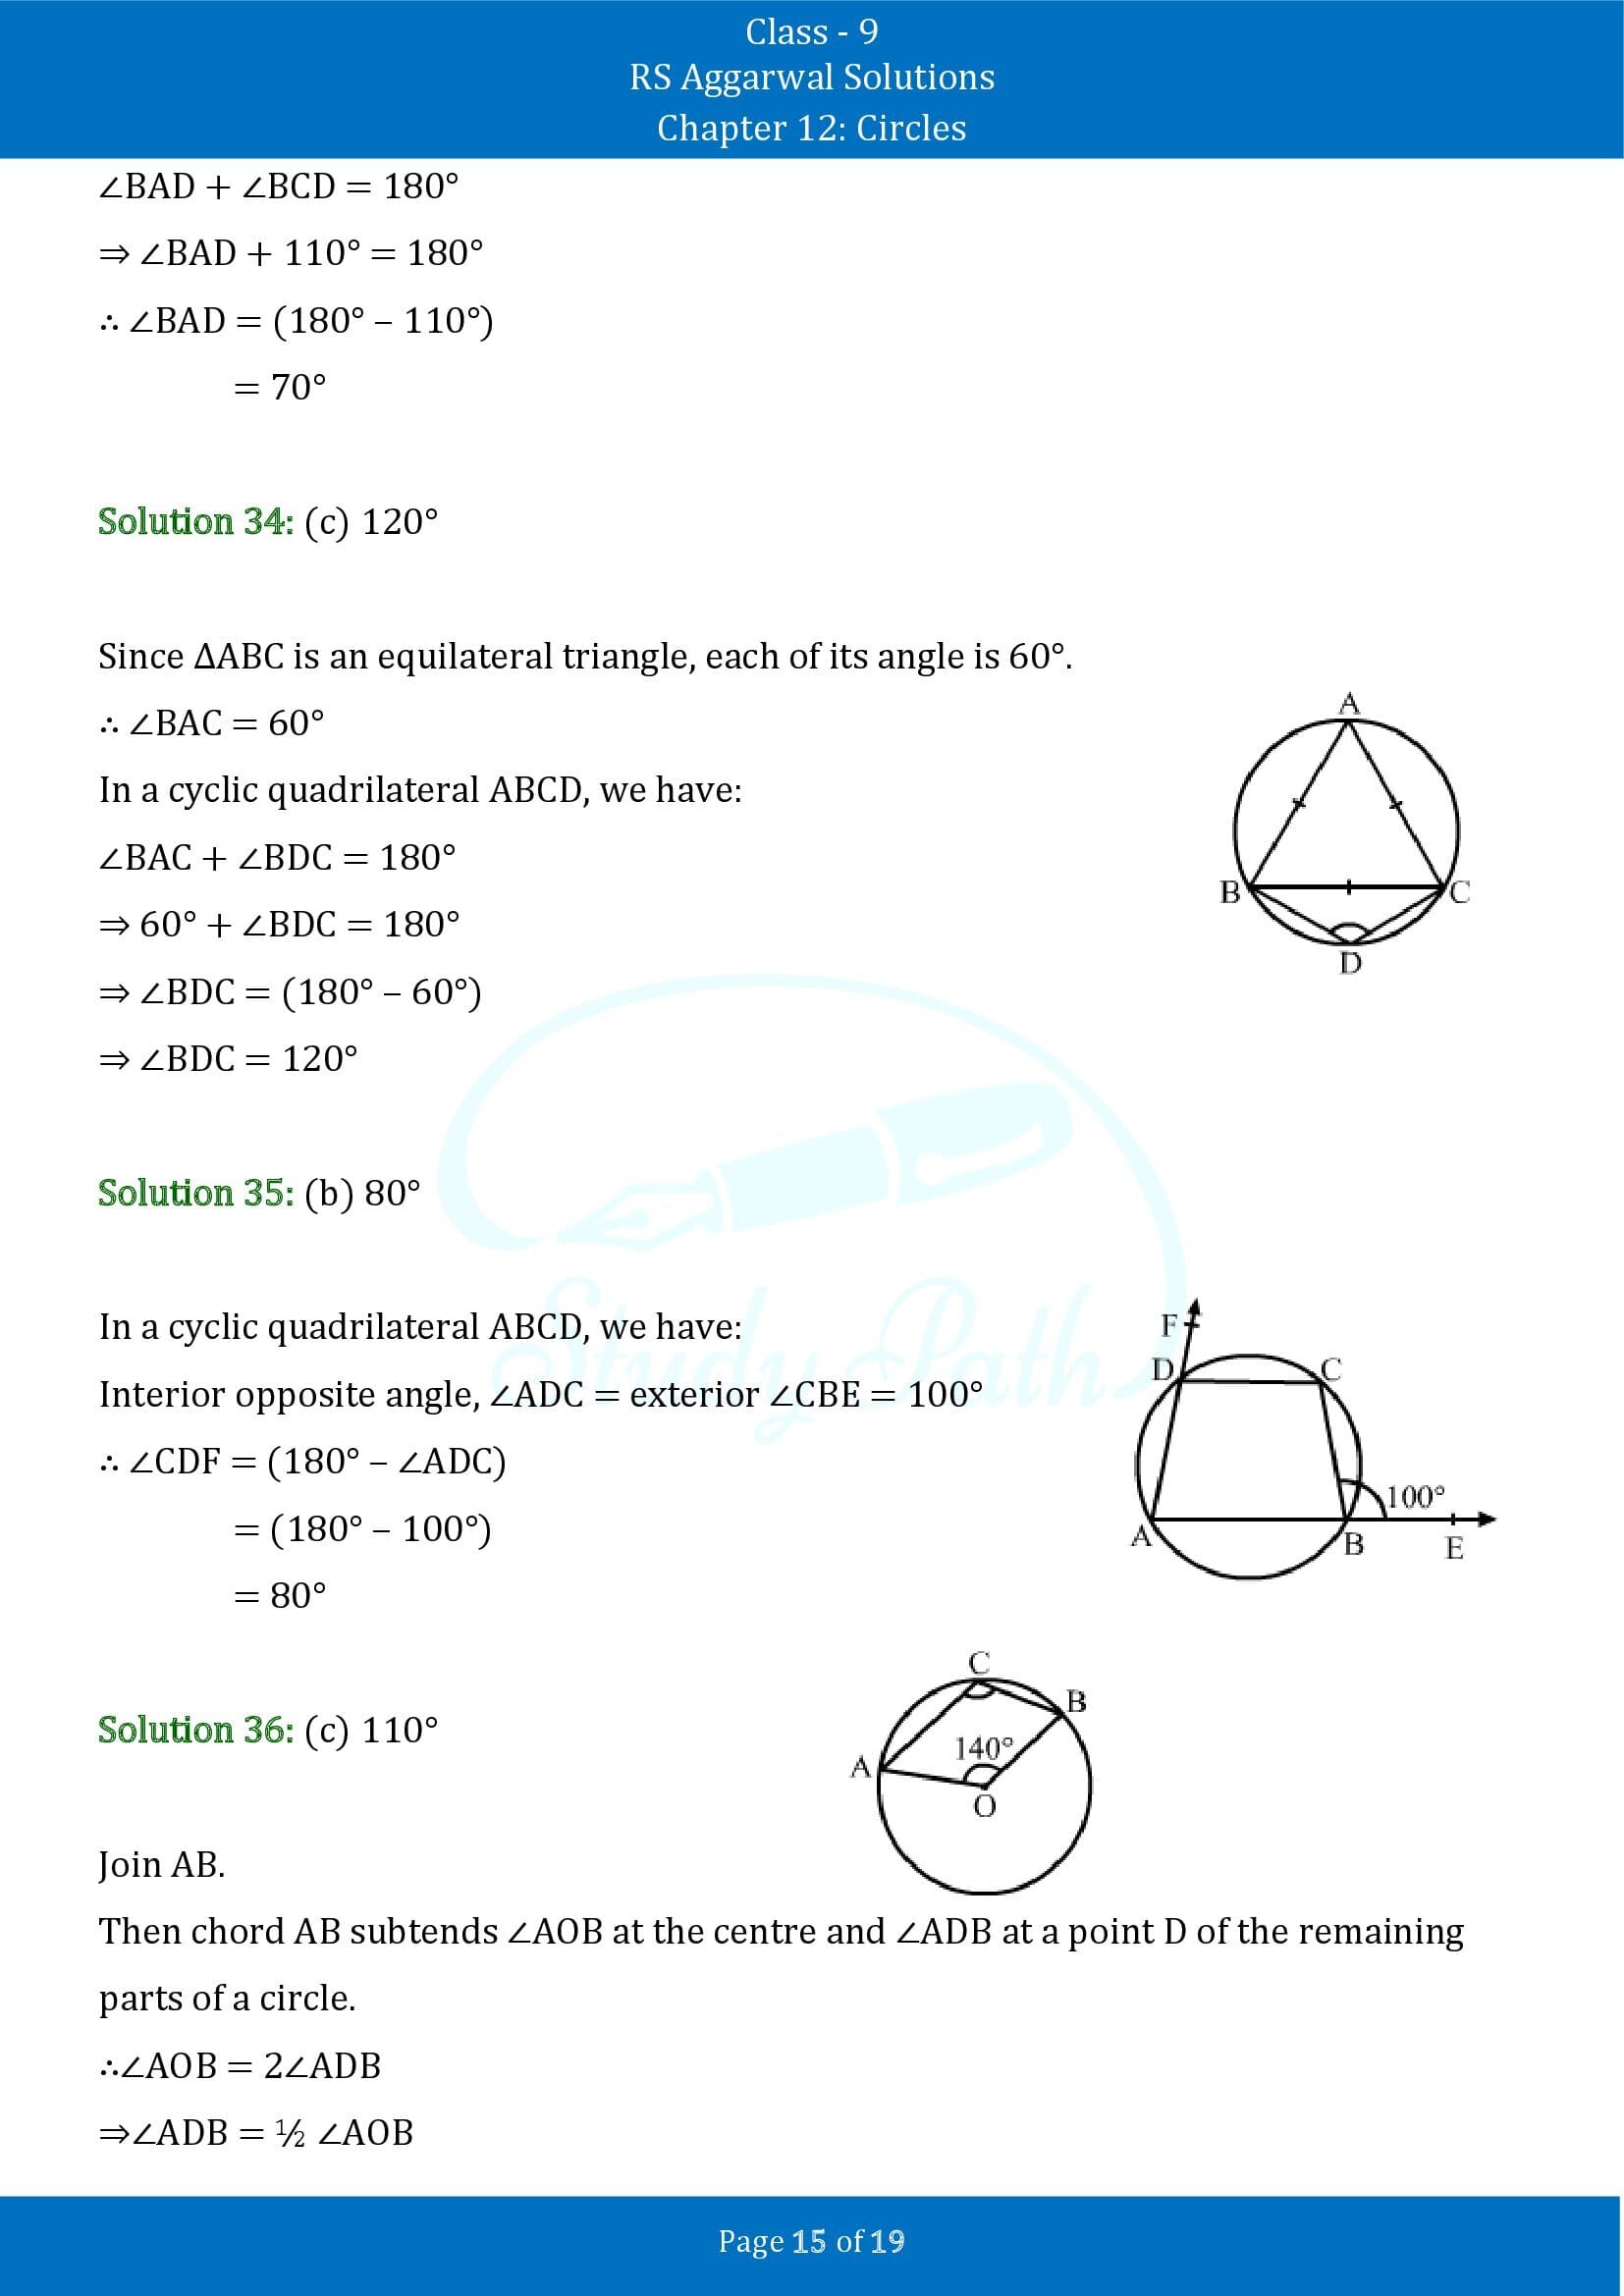 RS Aggarwal Solutions Class 9 Chapter 12 Circles Multiple Choice Questions MCQs 00015